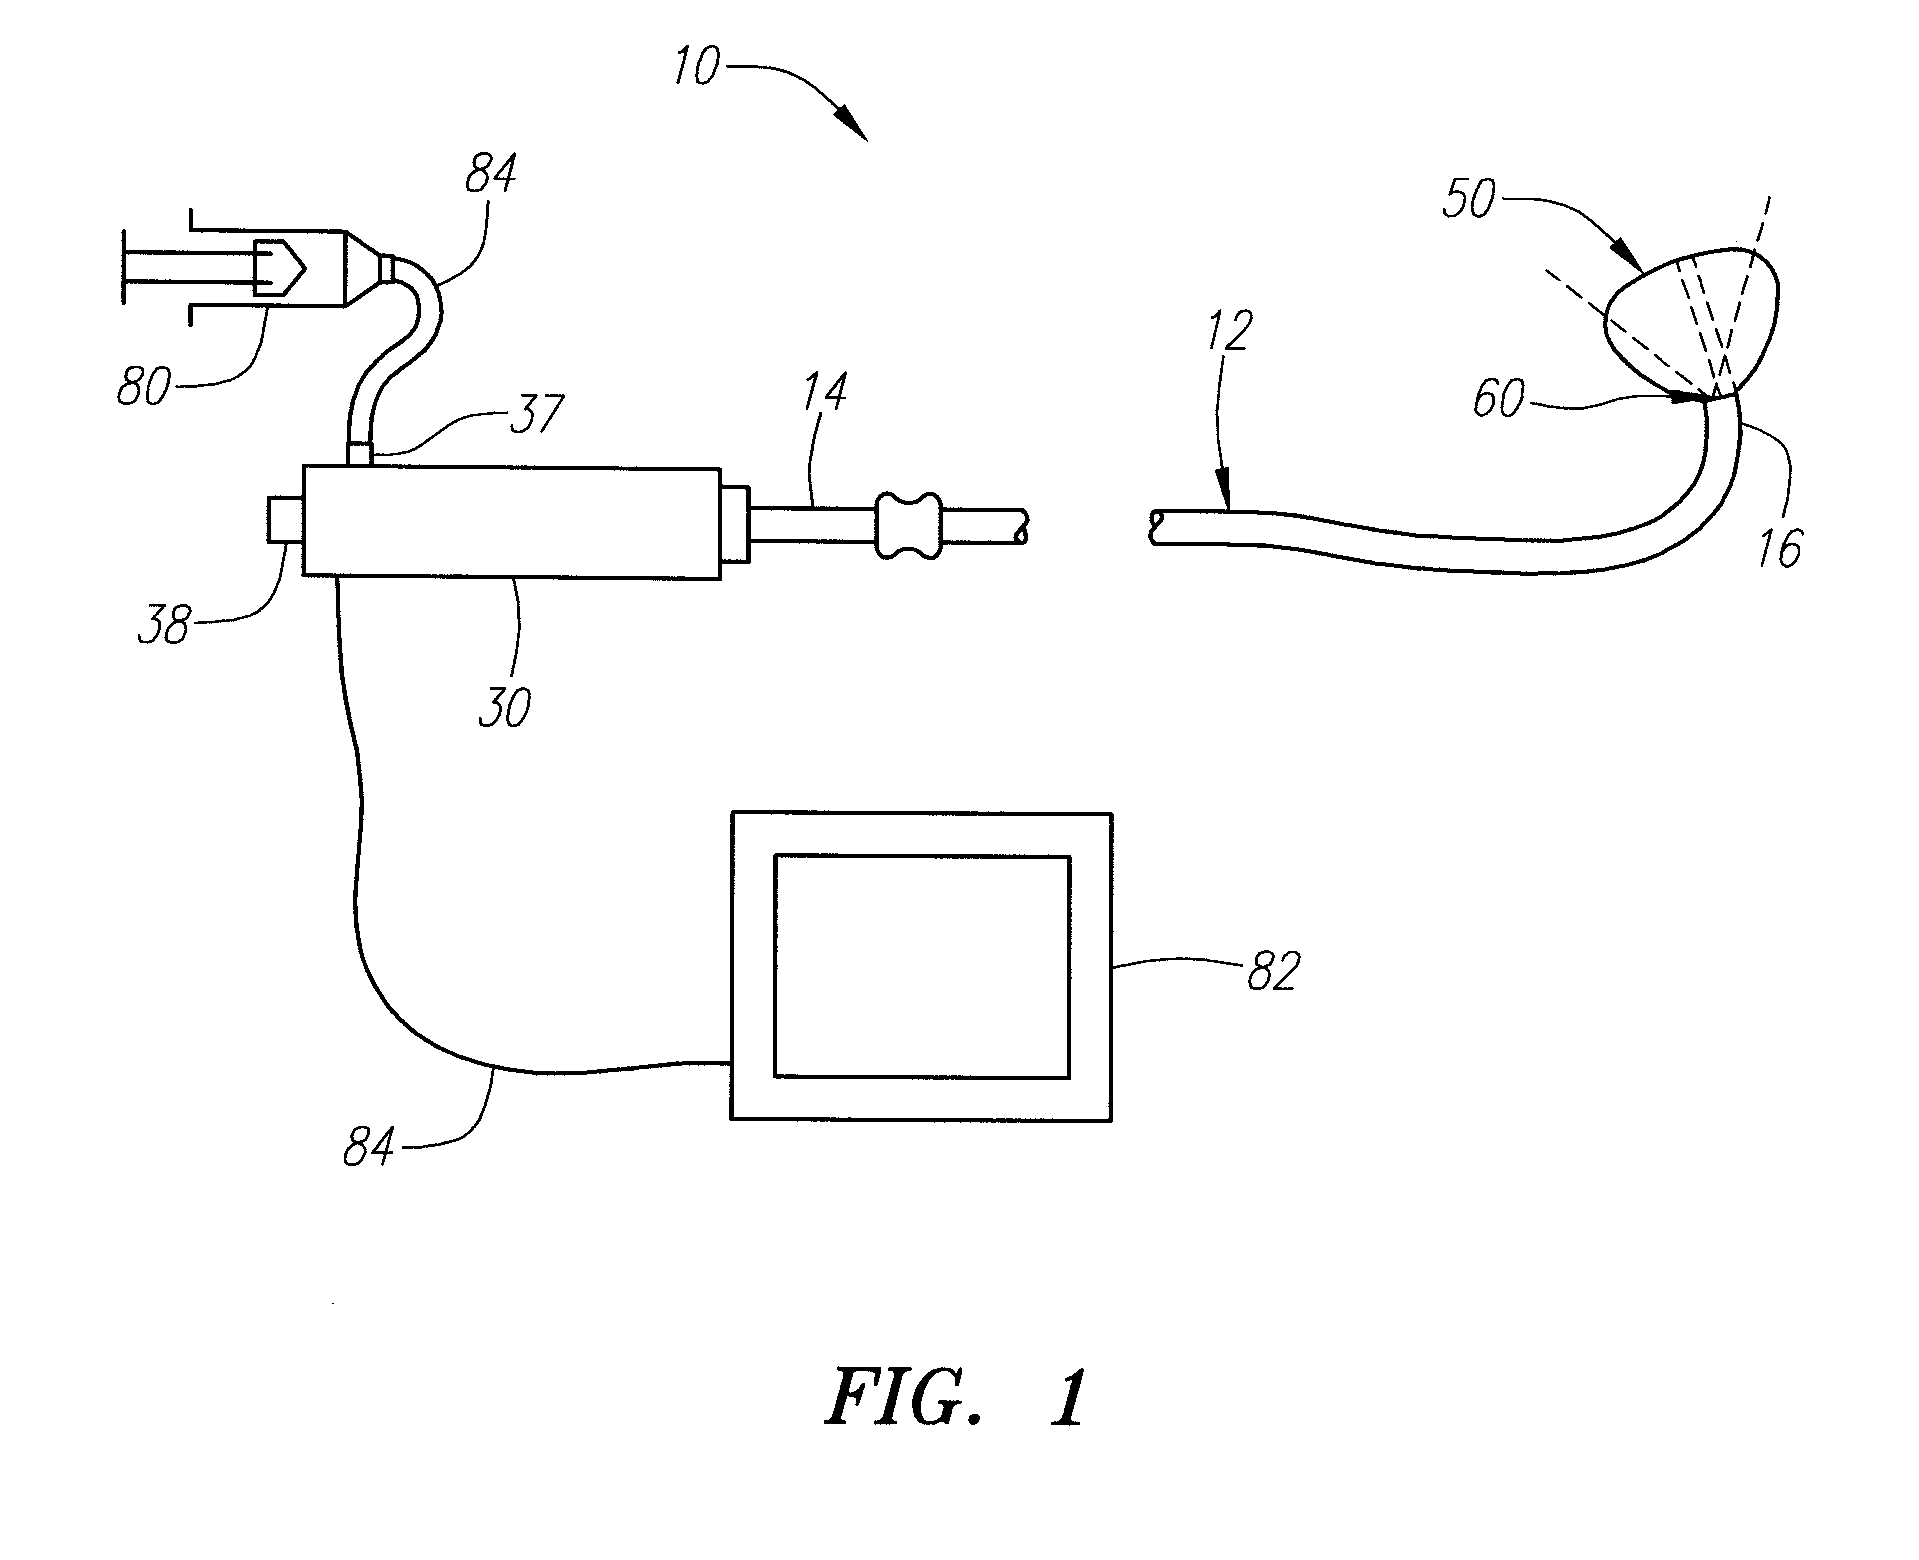 Complex Shaped Steerable Catheters and Methods for Making and Using Them